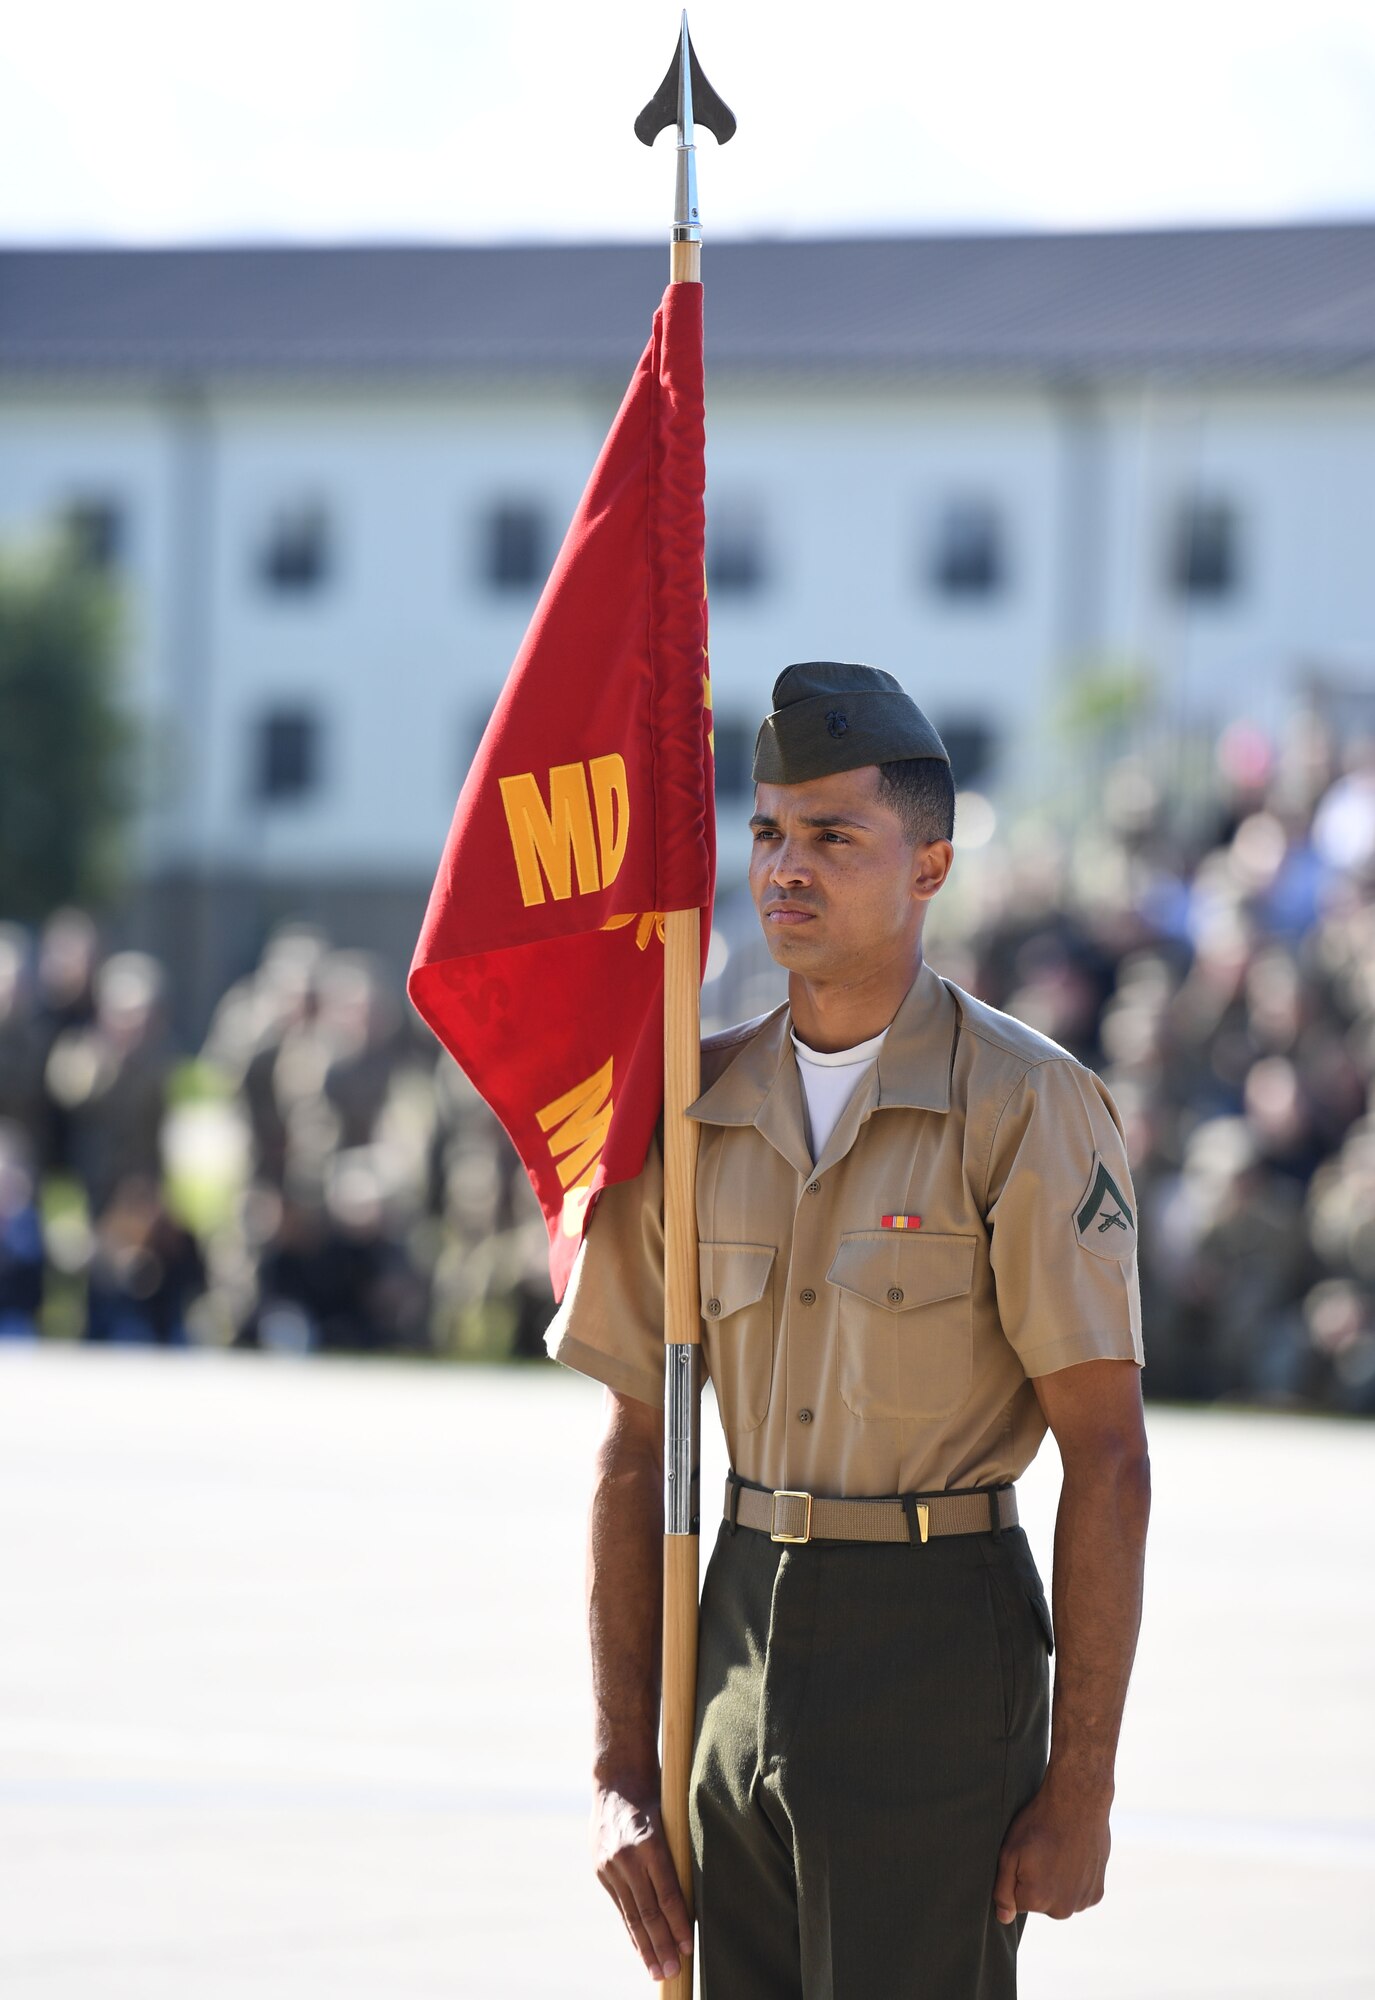 A member of the Keesler Marine Detachment regulation drill team performs during the 81st Training Group drill down on the Levitow Training Support Facility drill pad at Keesler Air Force Base, Mississippi, April 14, 2023.